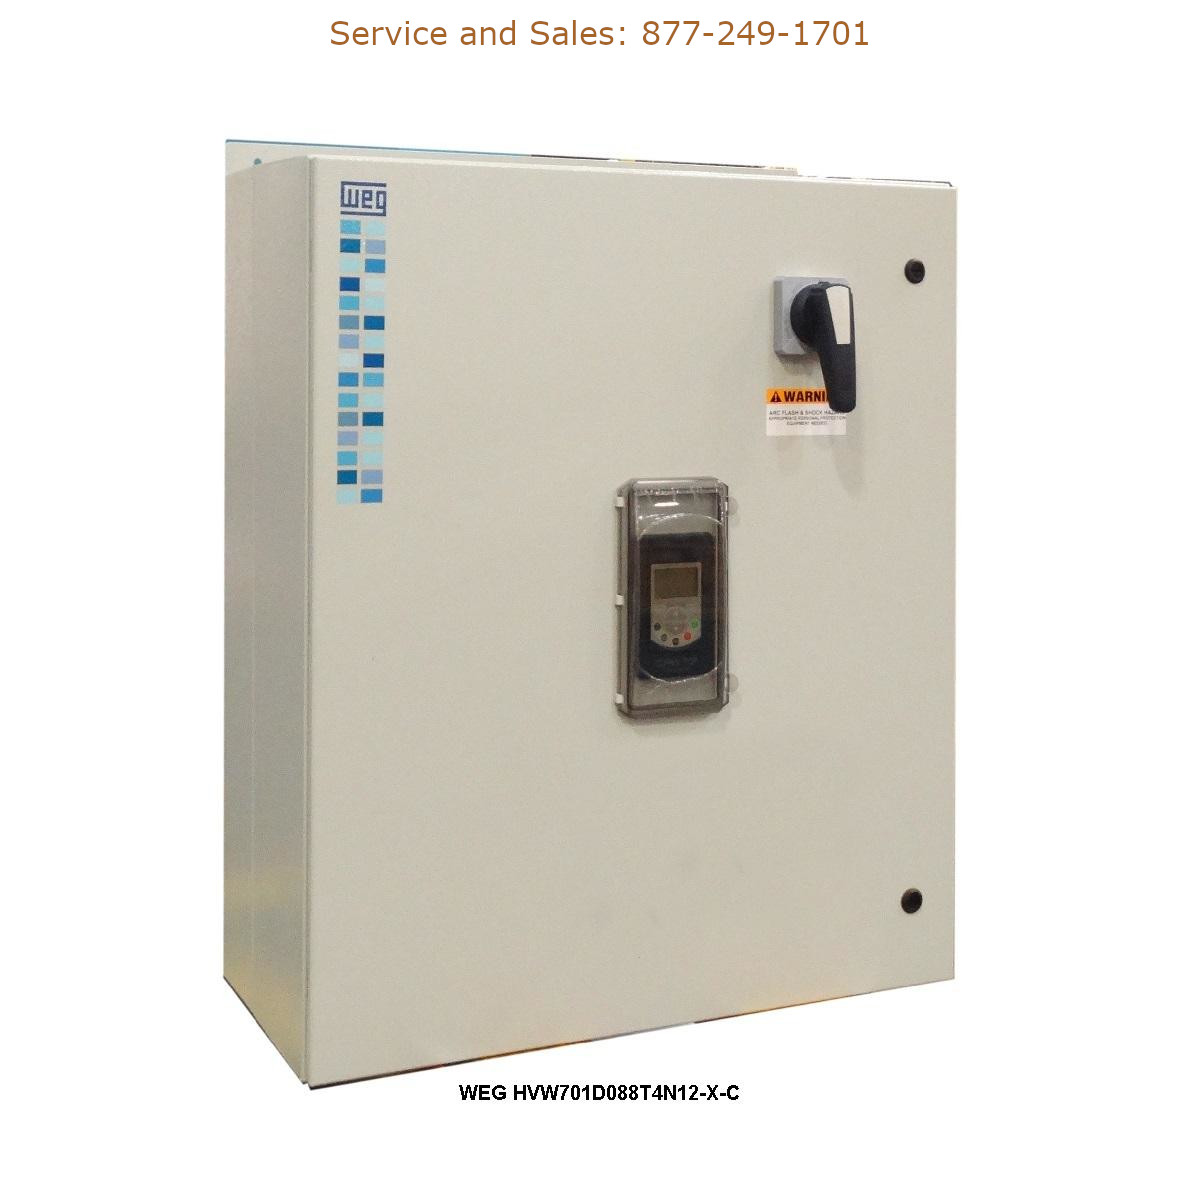 WEG HVW701D088T4N12-X-C WEG Model Number HVW701D088T4N12-X-C WEG Drives, Variable Speed Drives Repair Service, Troubleshooting, Replacement Parts https://gesrepair.com/wp-content/uploads/2022/WEG/WEG_HVW701D088T4N12-X-C_Drives_Variable_Speed_Drives.jpg